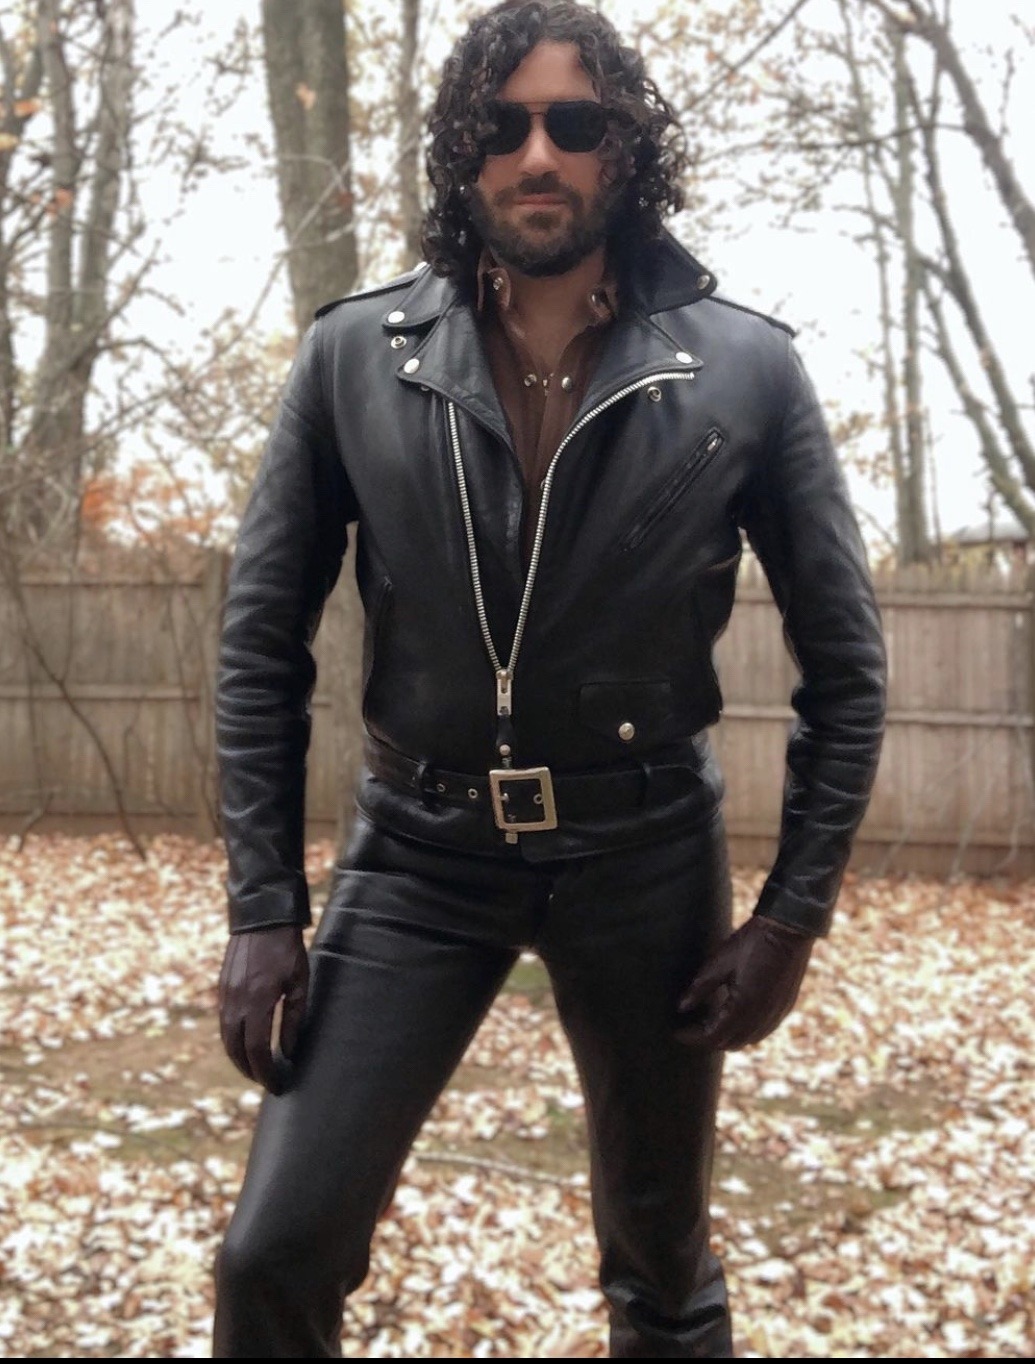 Hell Bent for Leather on Tumblr